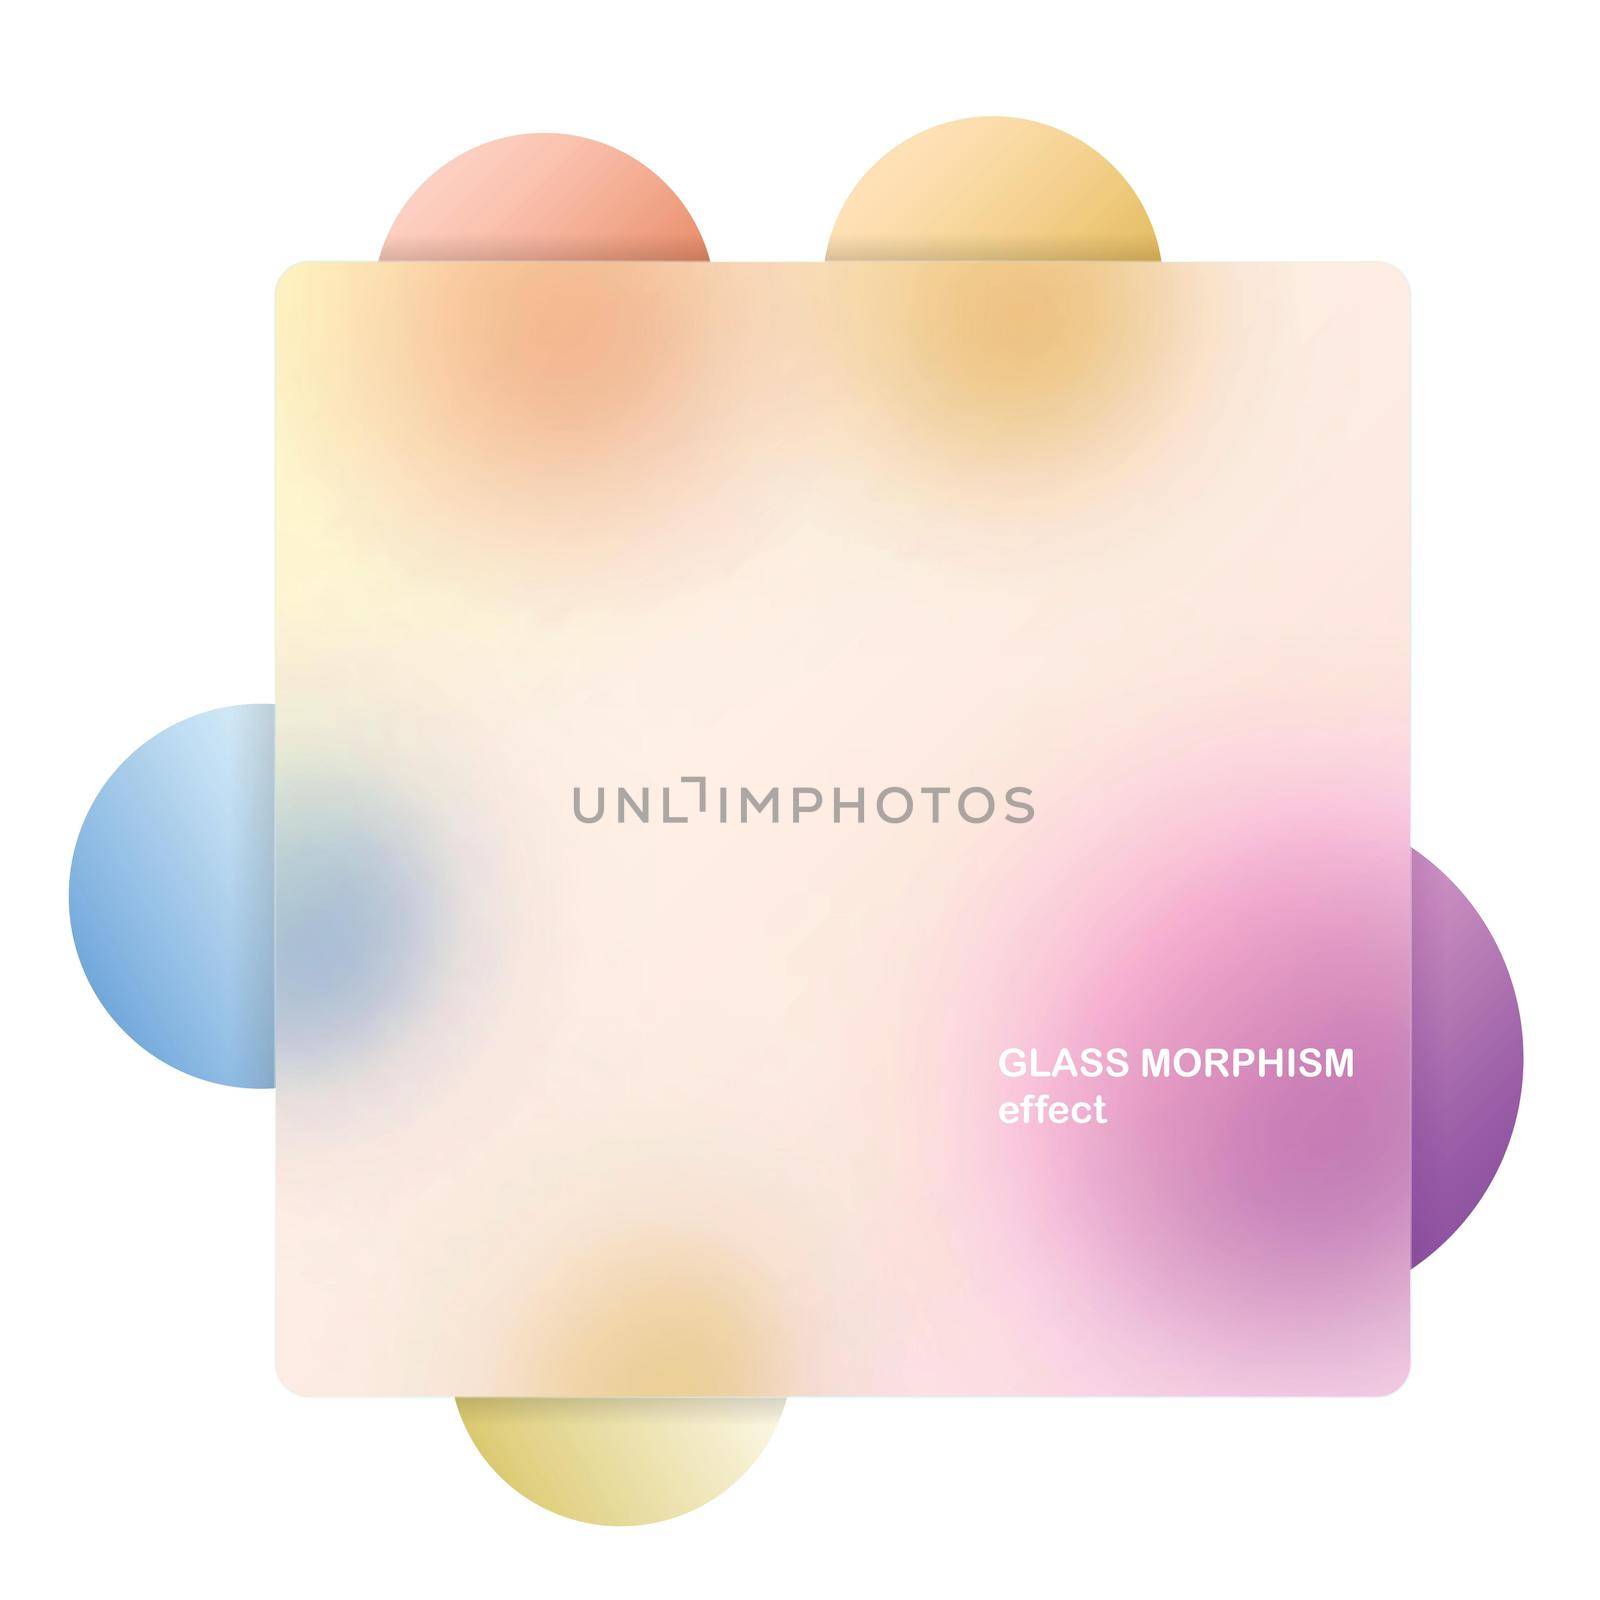 Modern background with glass morphism vector effect. Transparent glass card design. Glassmorphism trend style. Abstract banner with colored, white circles with blur and shadows. Vector illustration by allaku